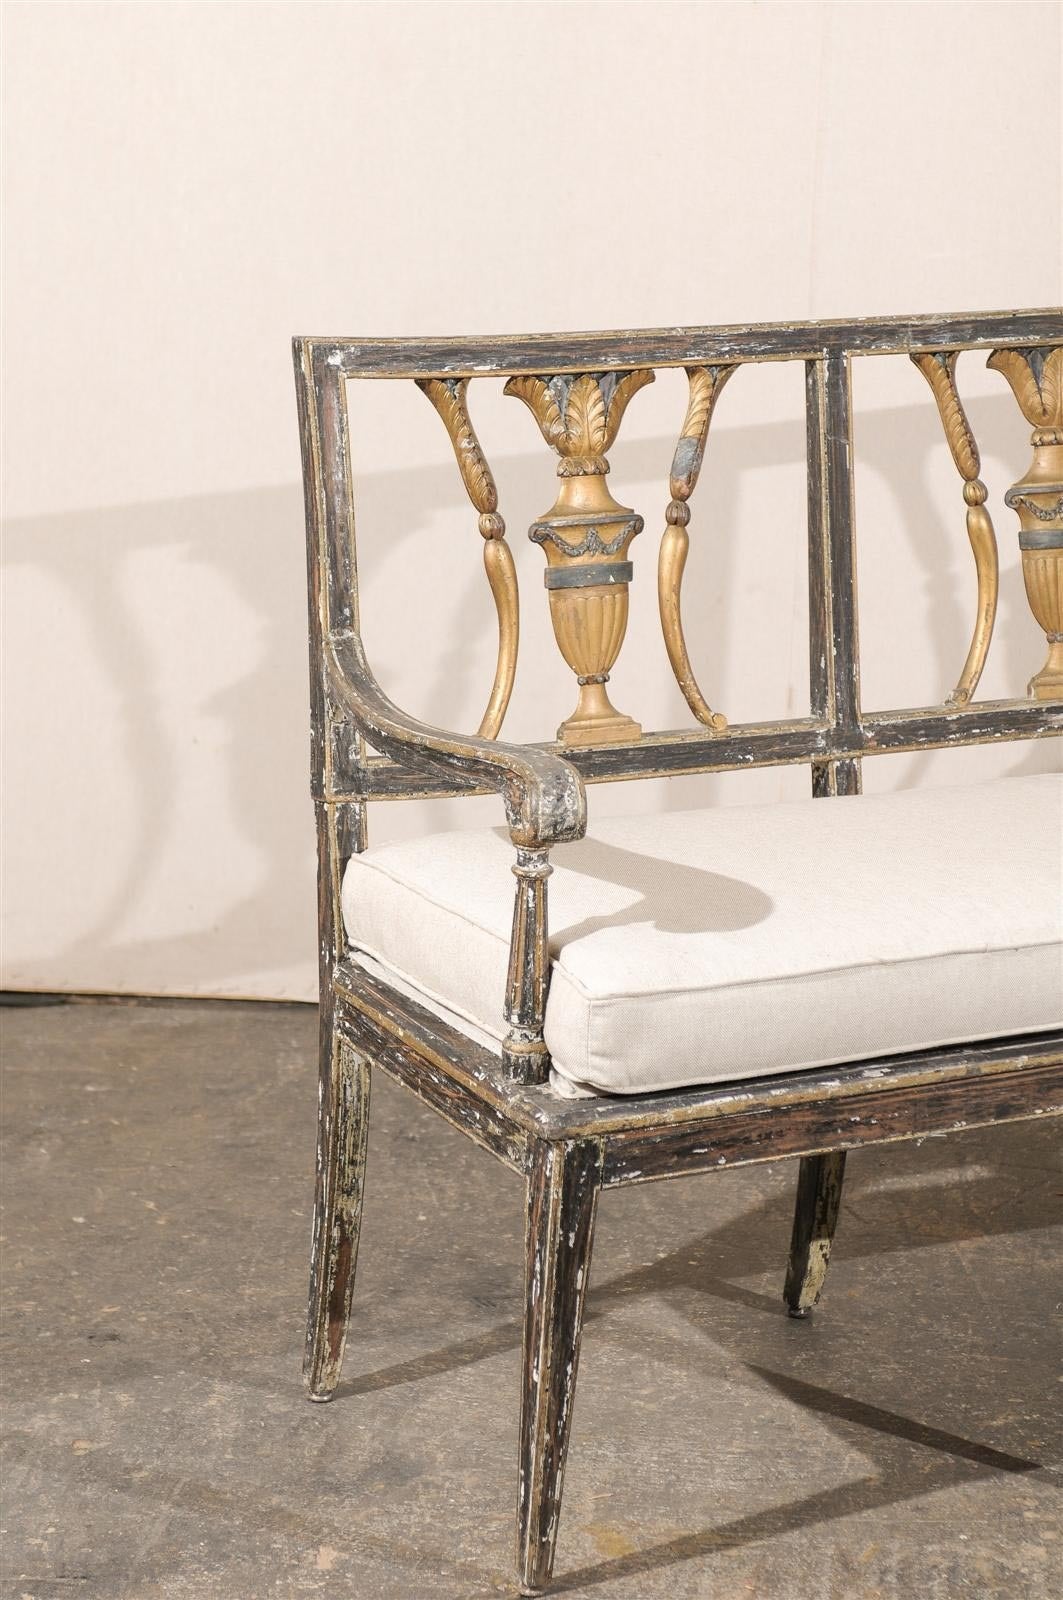 Gilt Early 19th Century Italian Painted and Gilded Wooden Bench